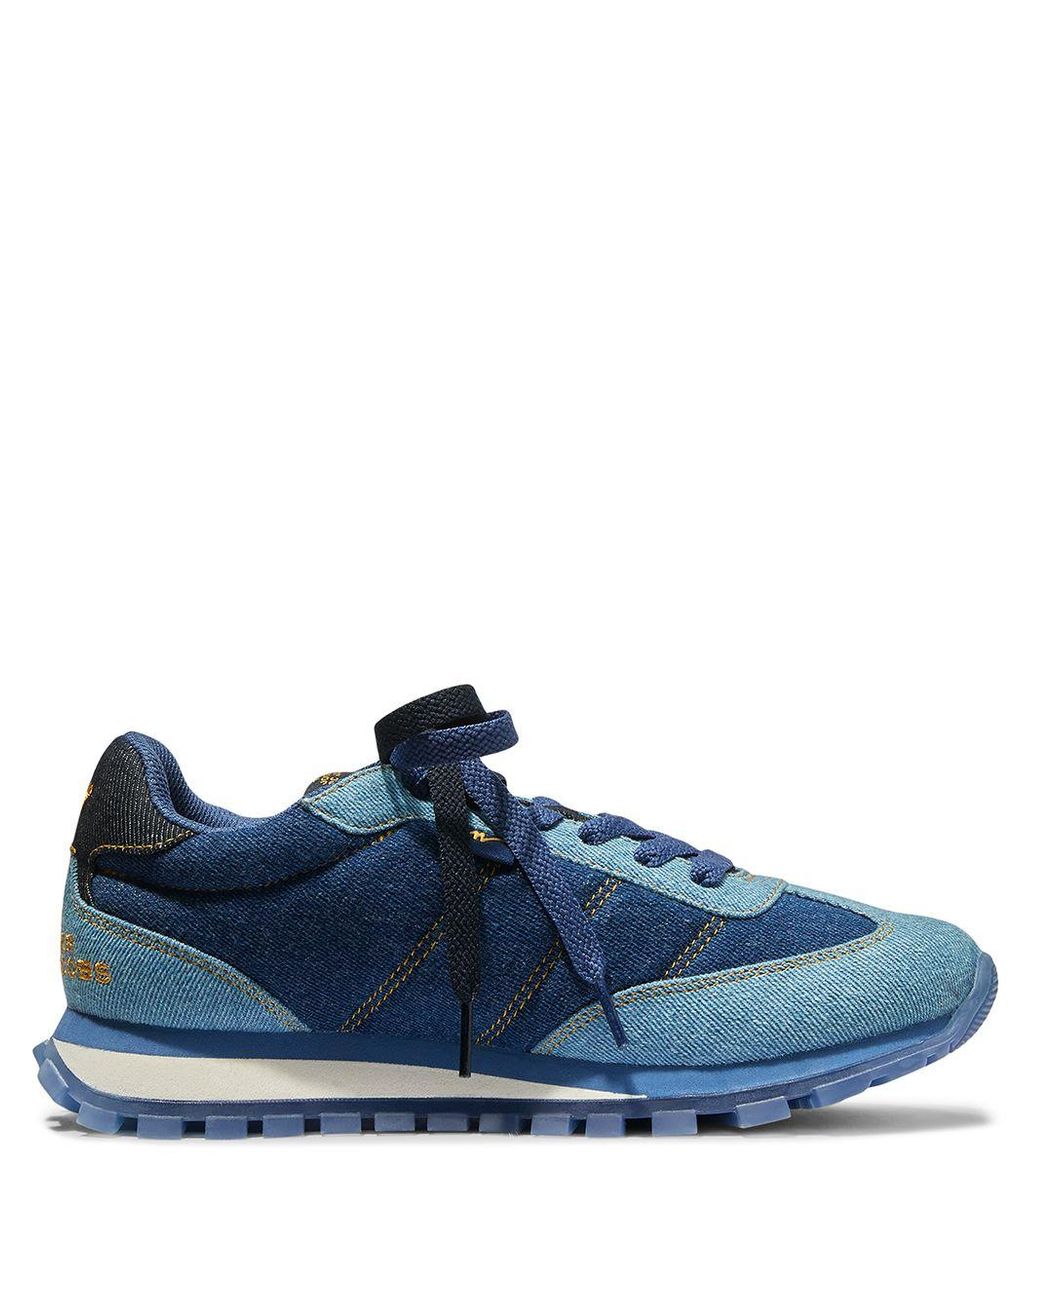 Marc Jacobs The Denim Jogger Sneakers in Blue | Lyst